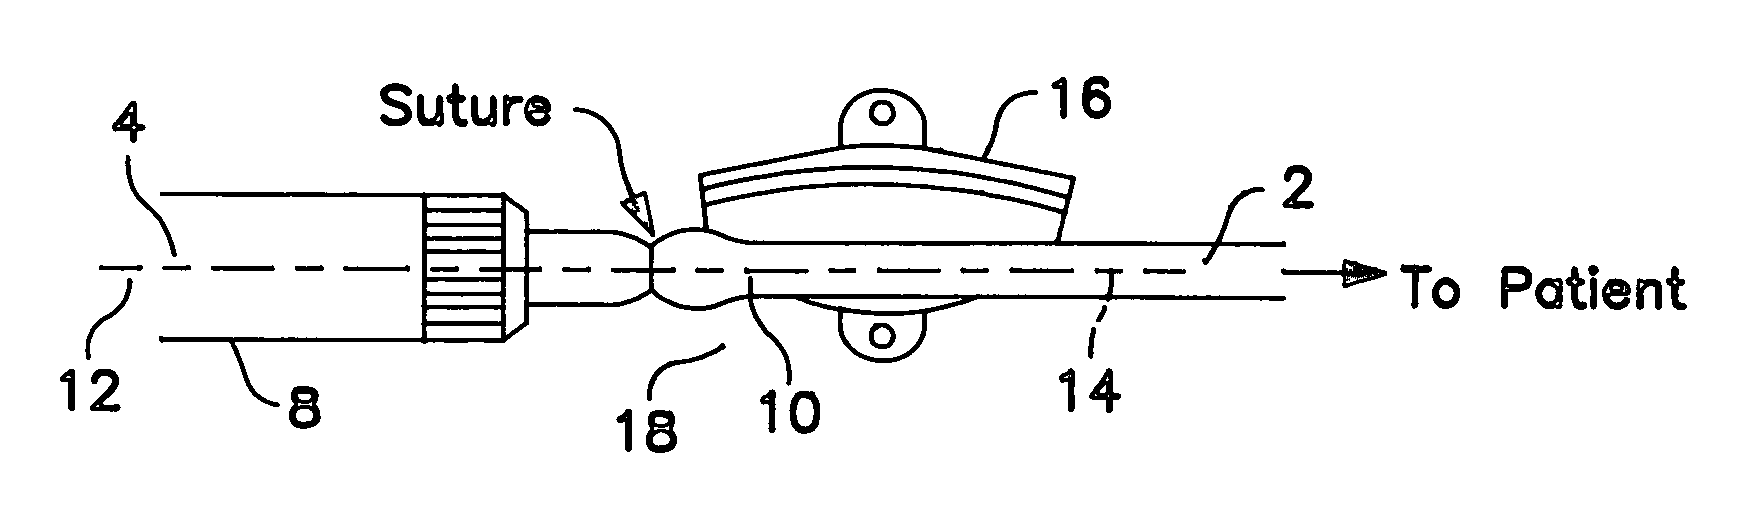 Device used to connect an external ventricular drainage catheter